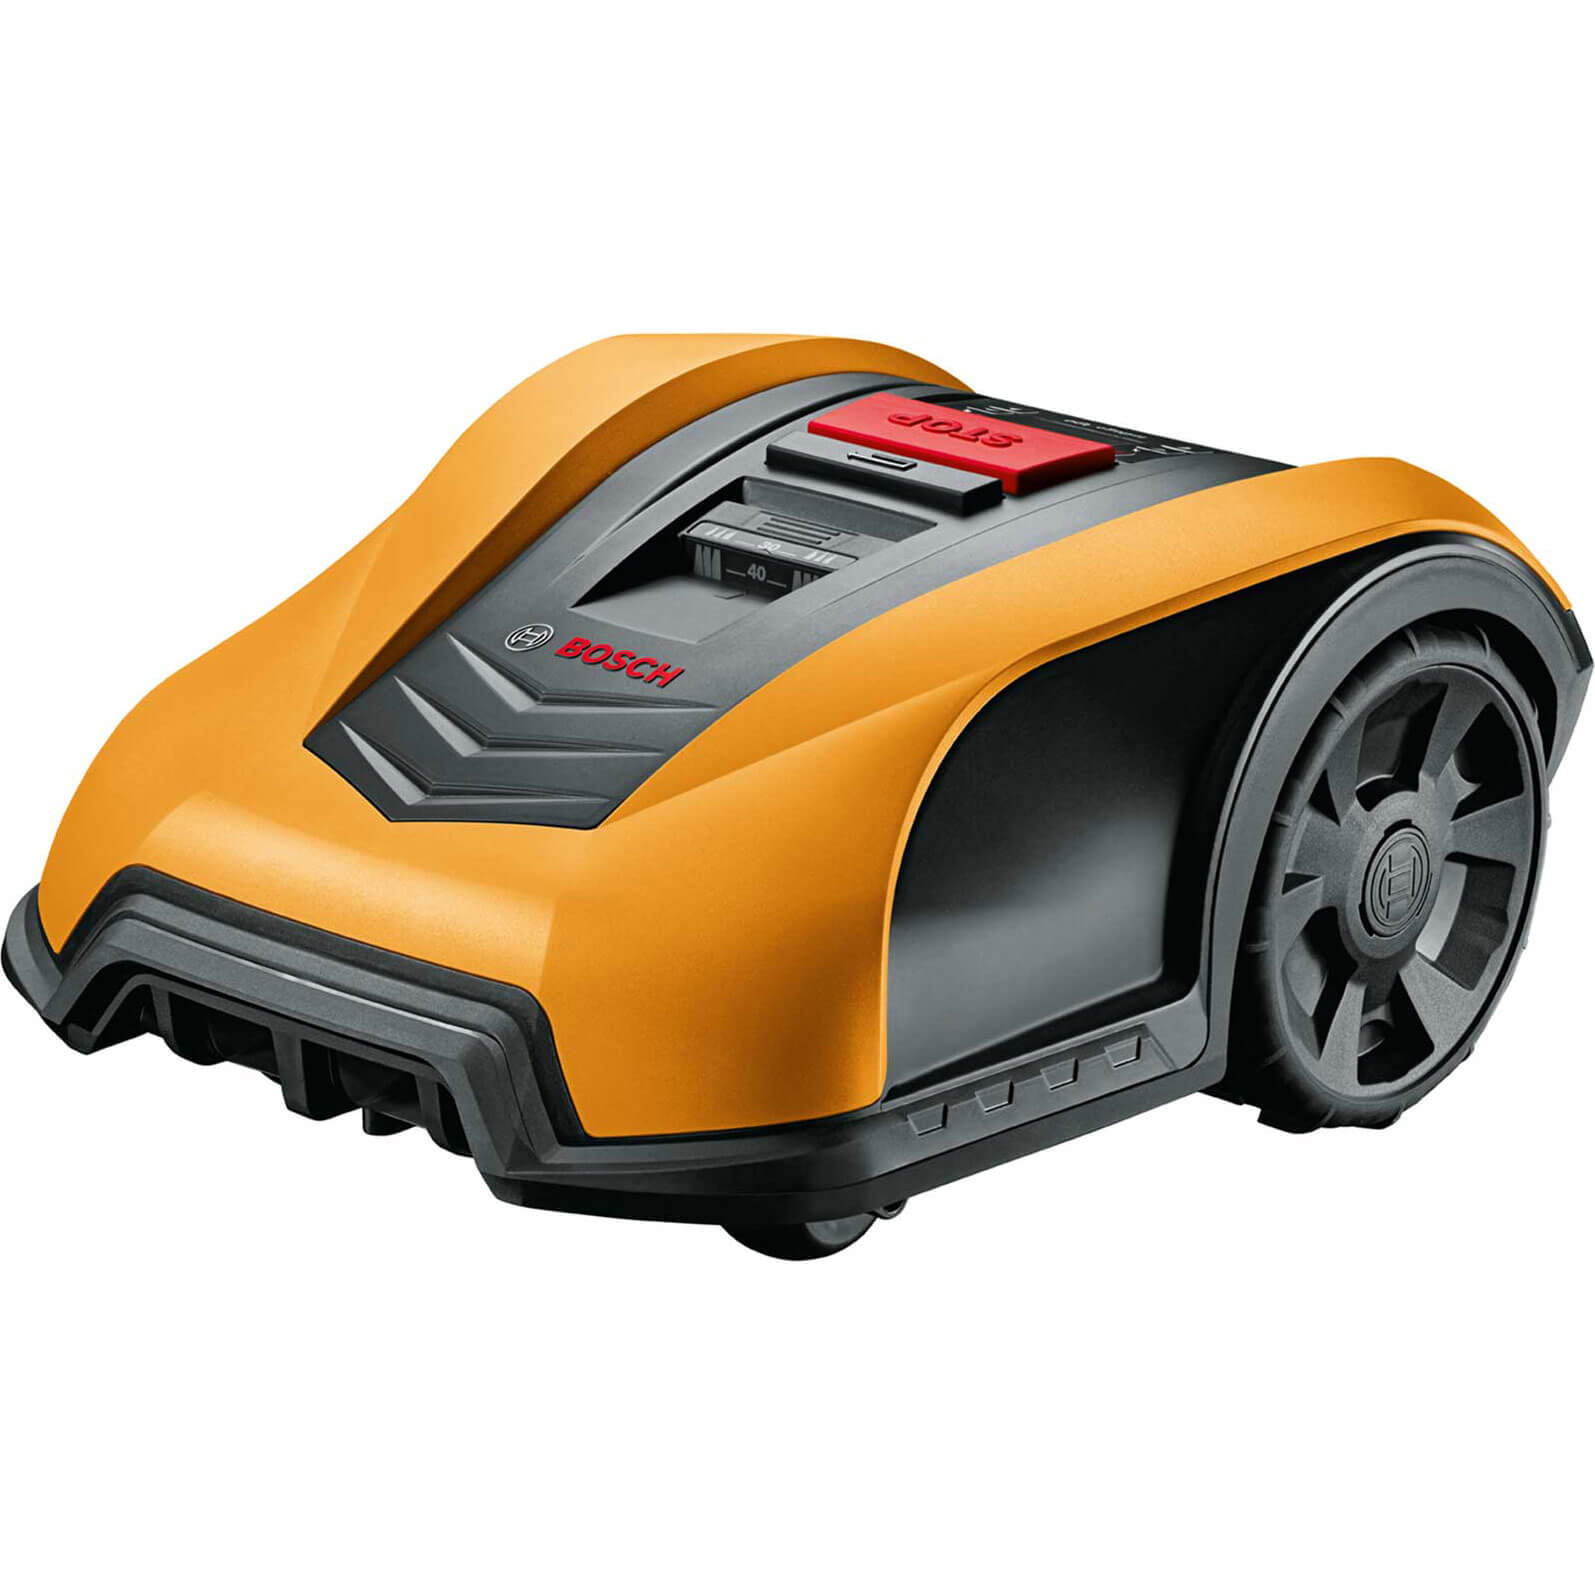 Bosch Top Cover for Indego Lawnmowers Orange / Yellow